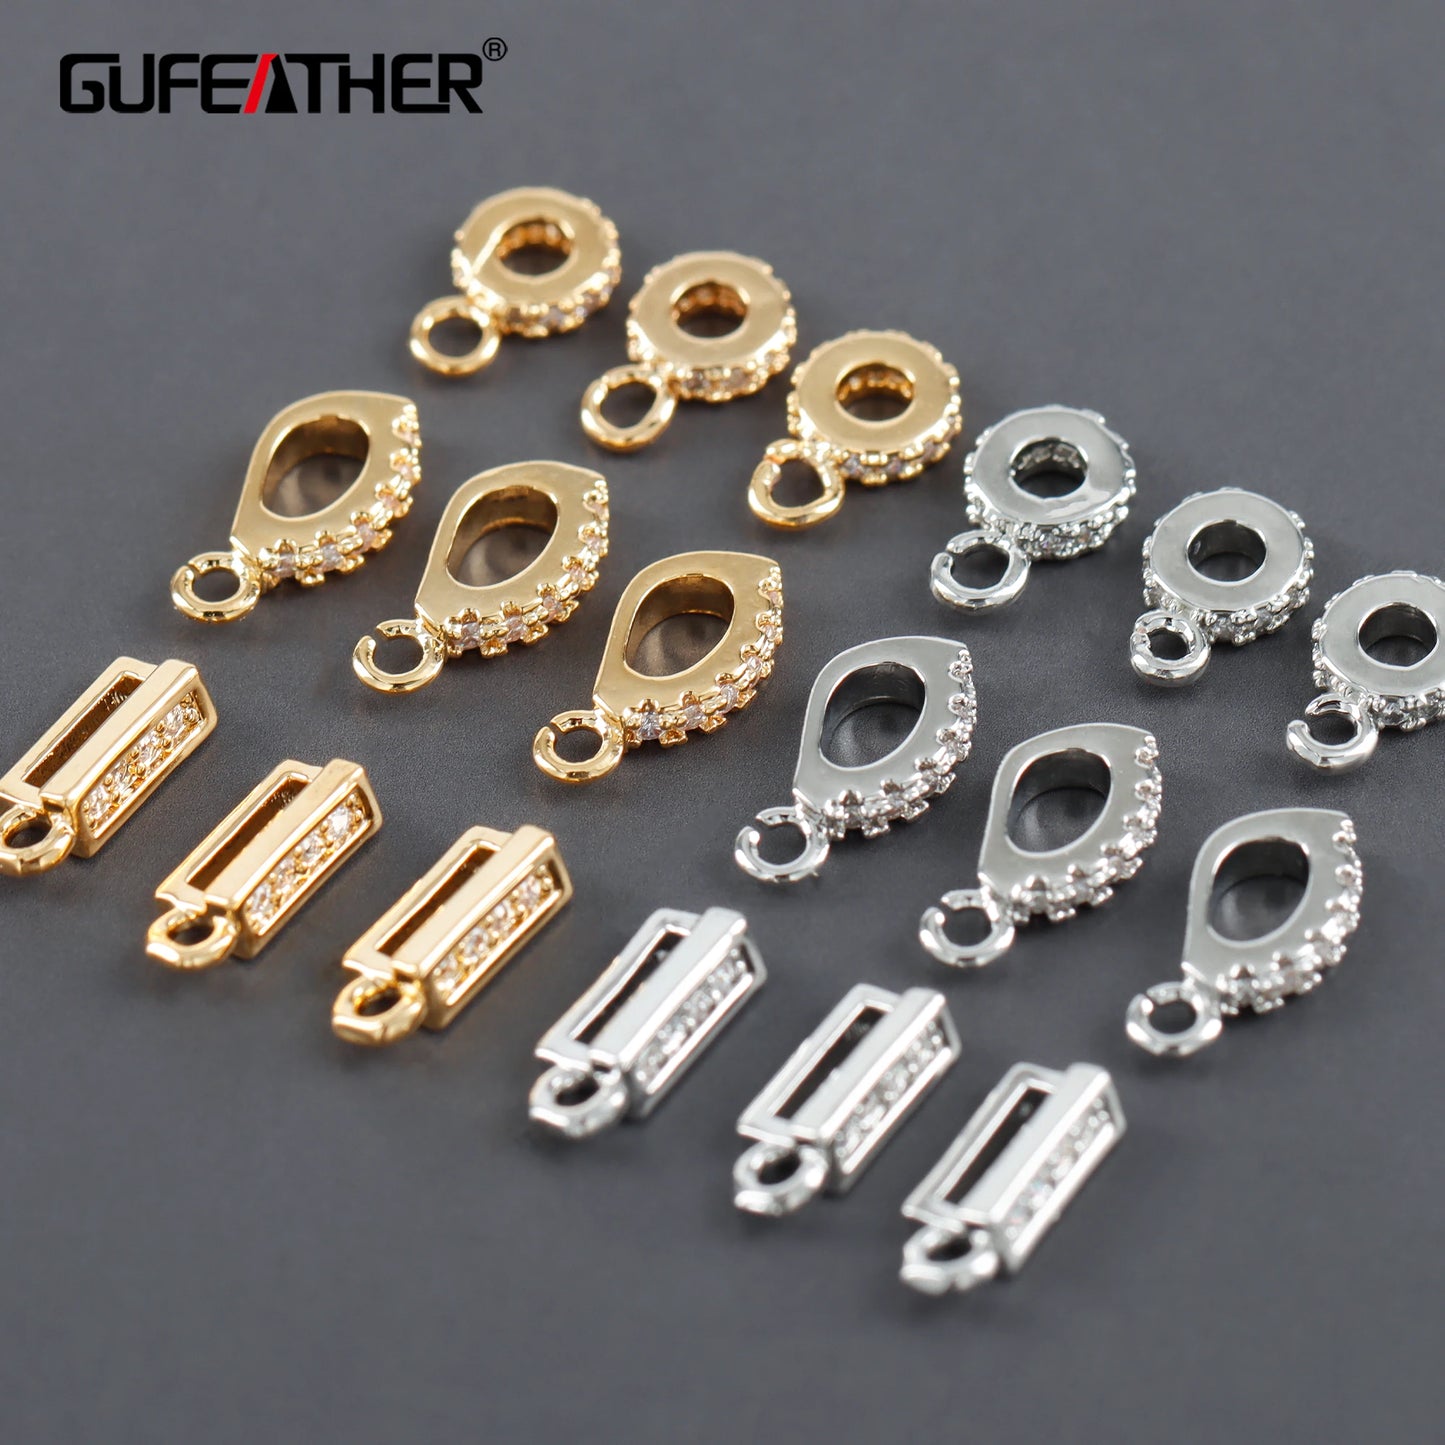 GUFEATHER M1131,jewelry accessories,connector hooks,18k gold rhodium plated,copper,pass REACH,nickel free,diy jewelry,10pcs/lot